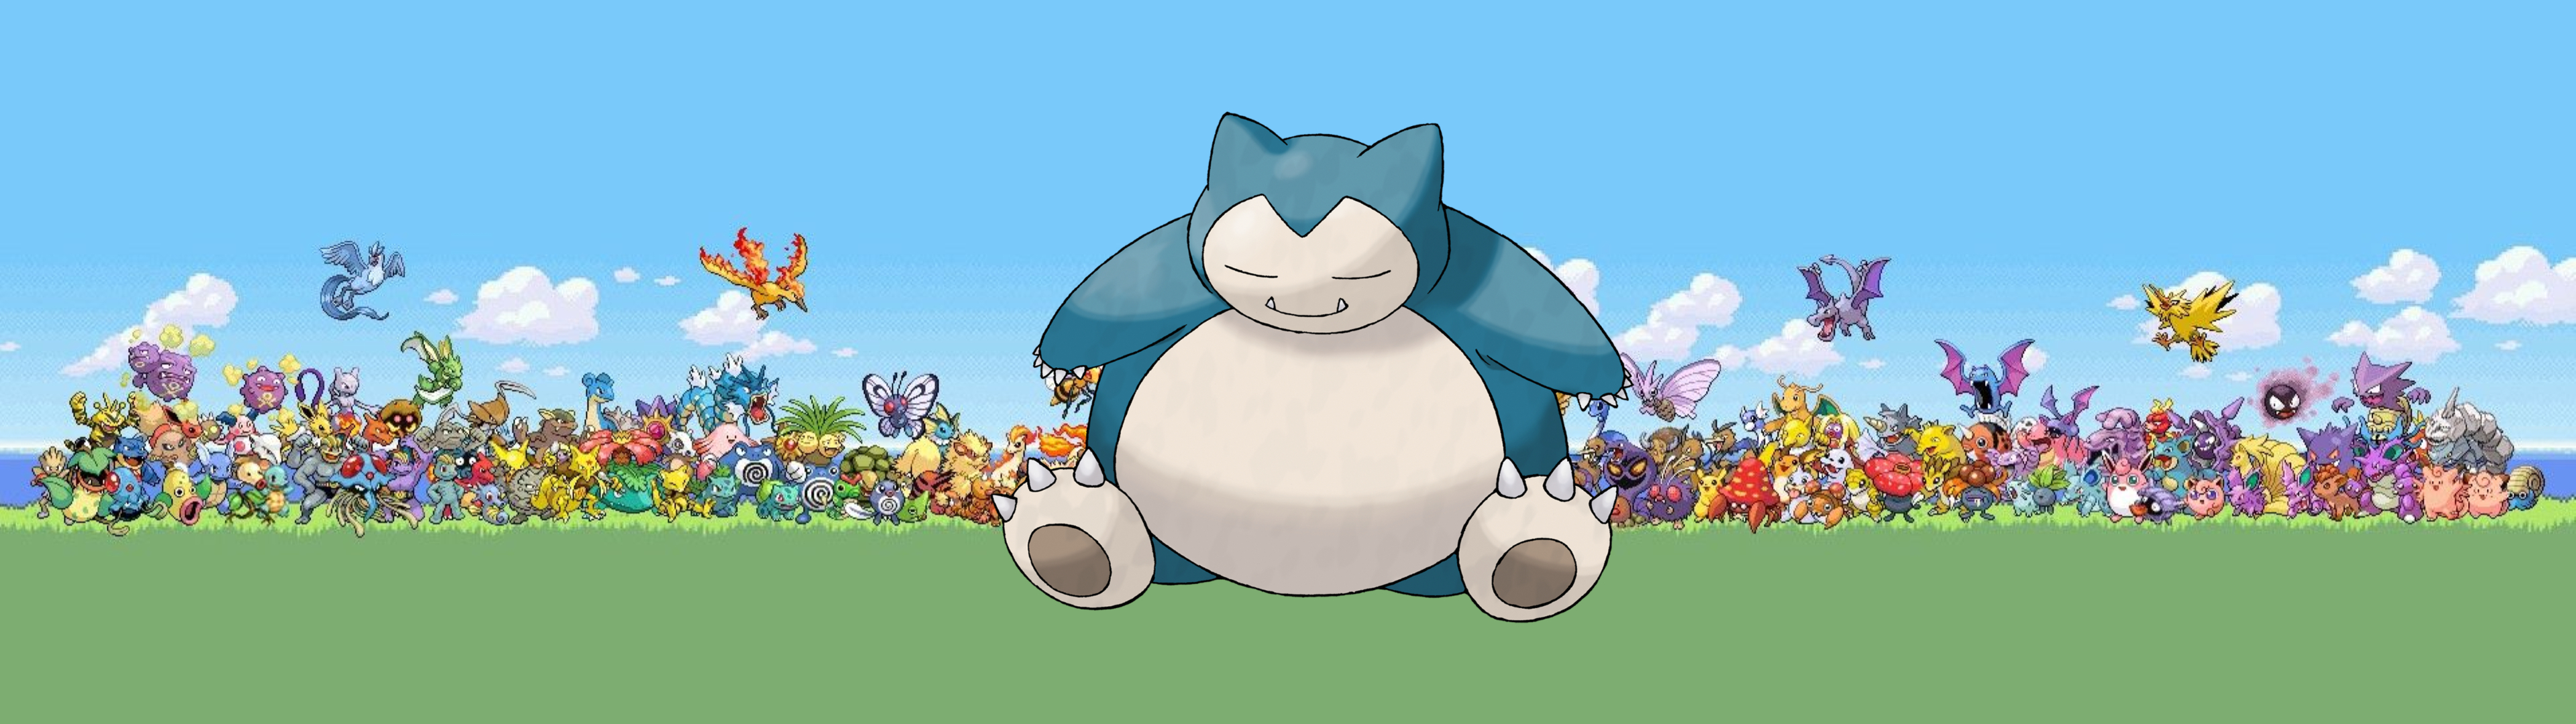 3840x1080 Looking for a Snorlax Wallpaper? : r/multiwall